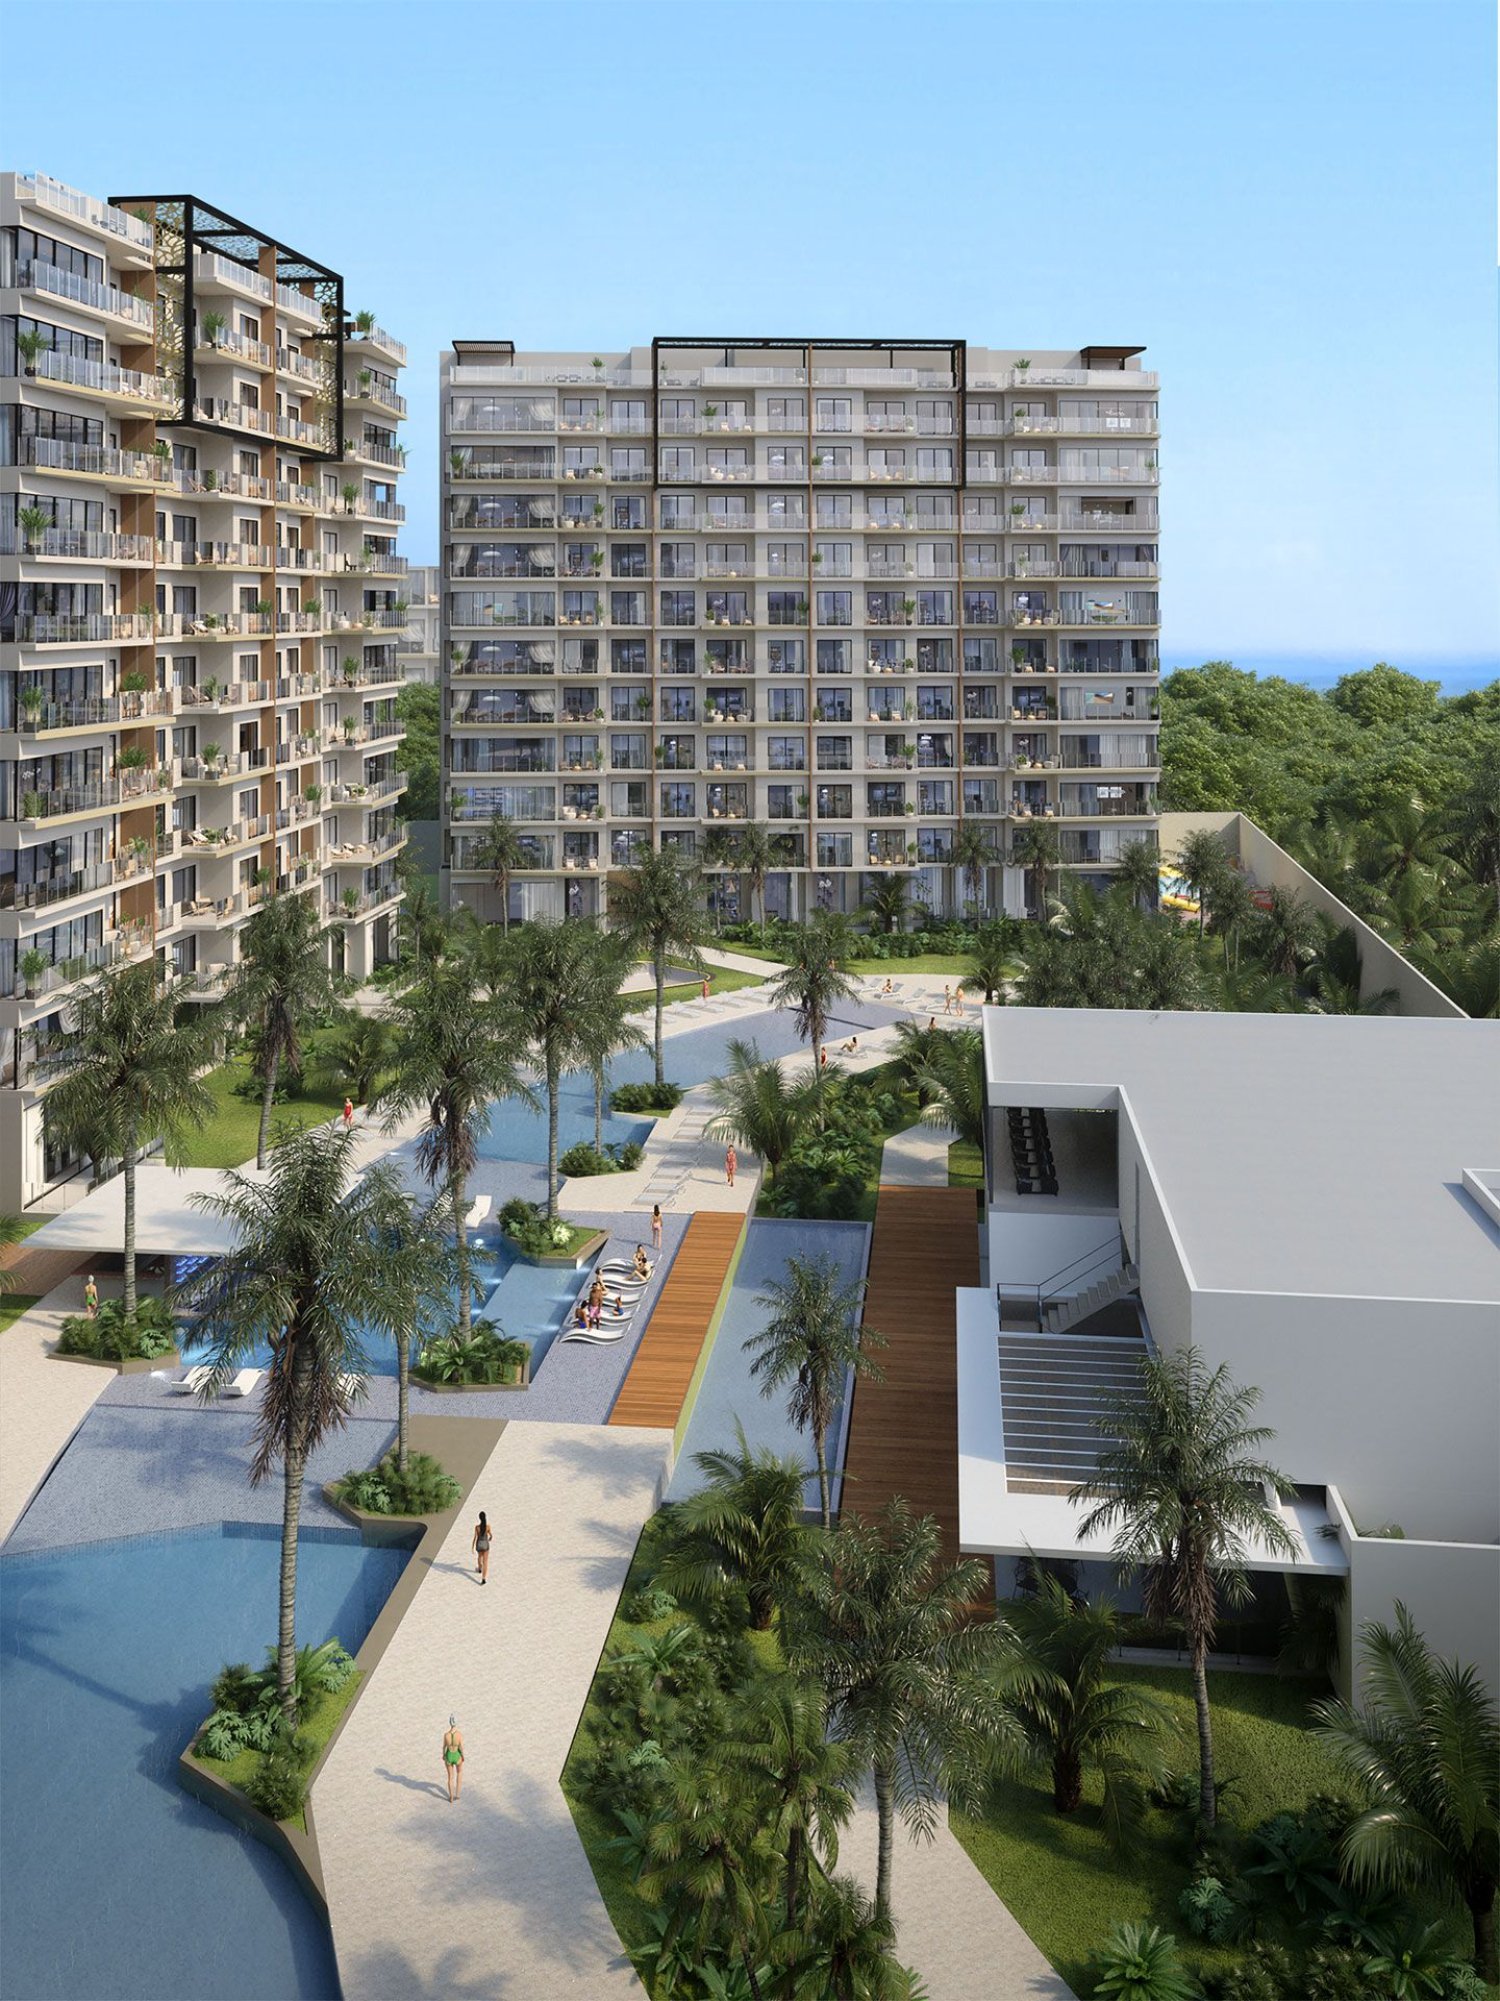 Flats for sale in Riviera Maya, Mexico